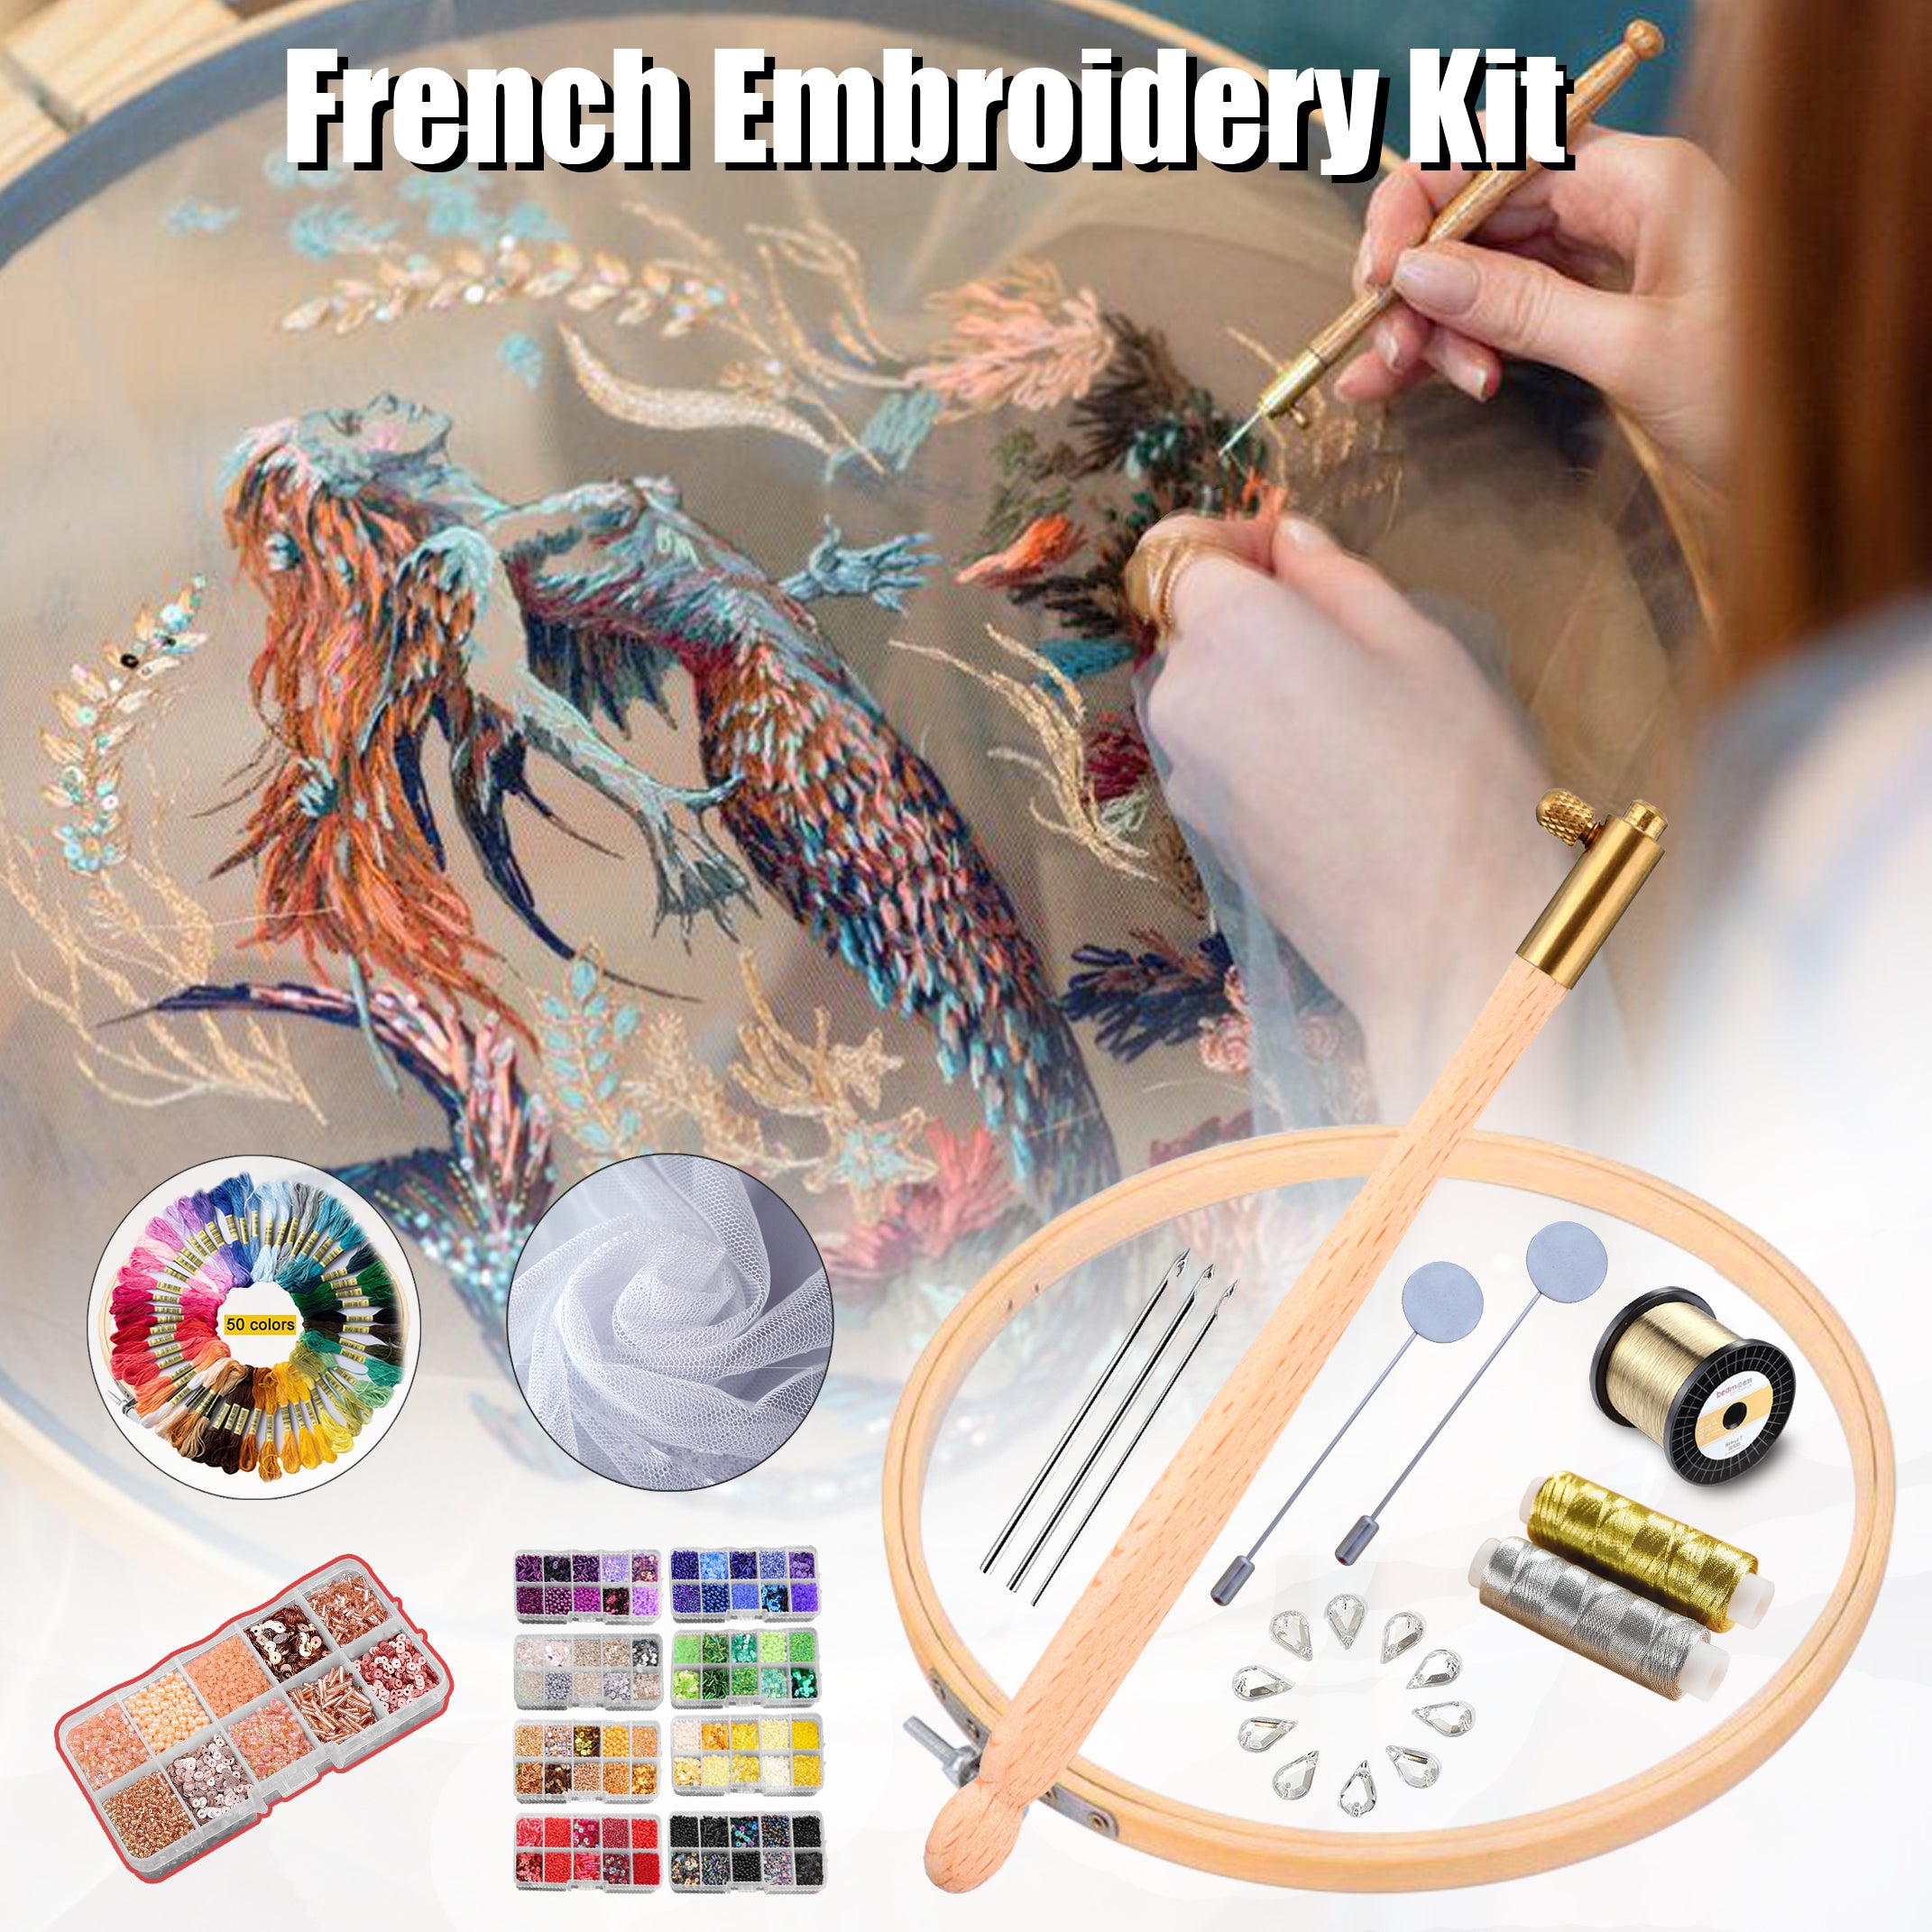 French Embroidery Kit – Sewing Mends Soul